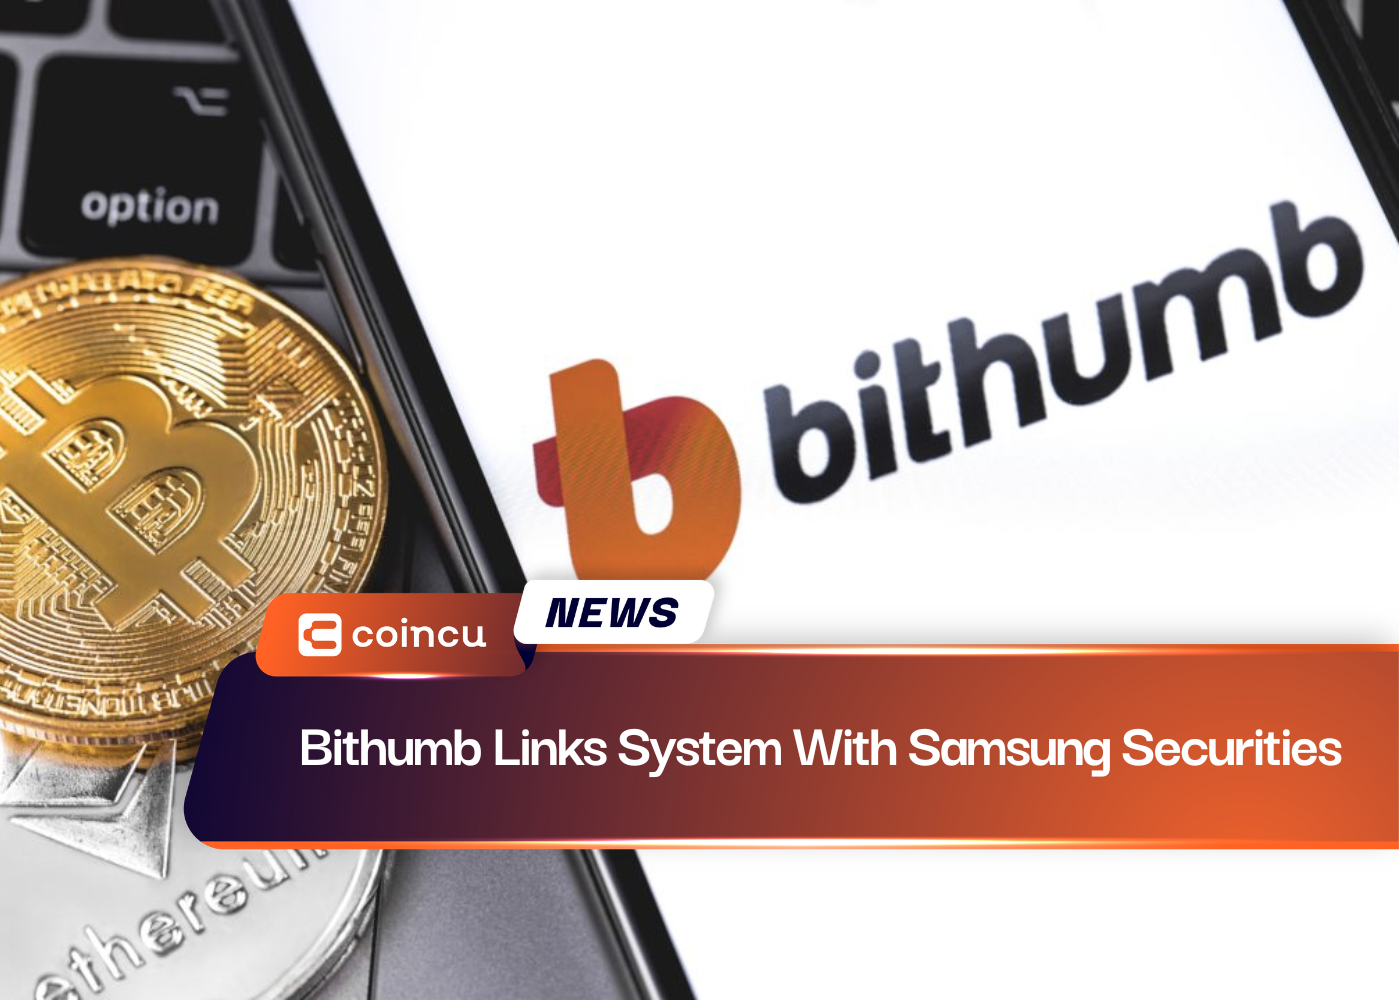 Bithumb Links System With Samsung Securities